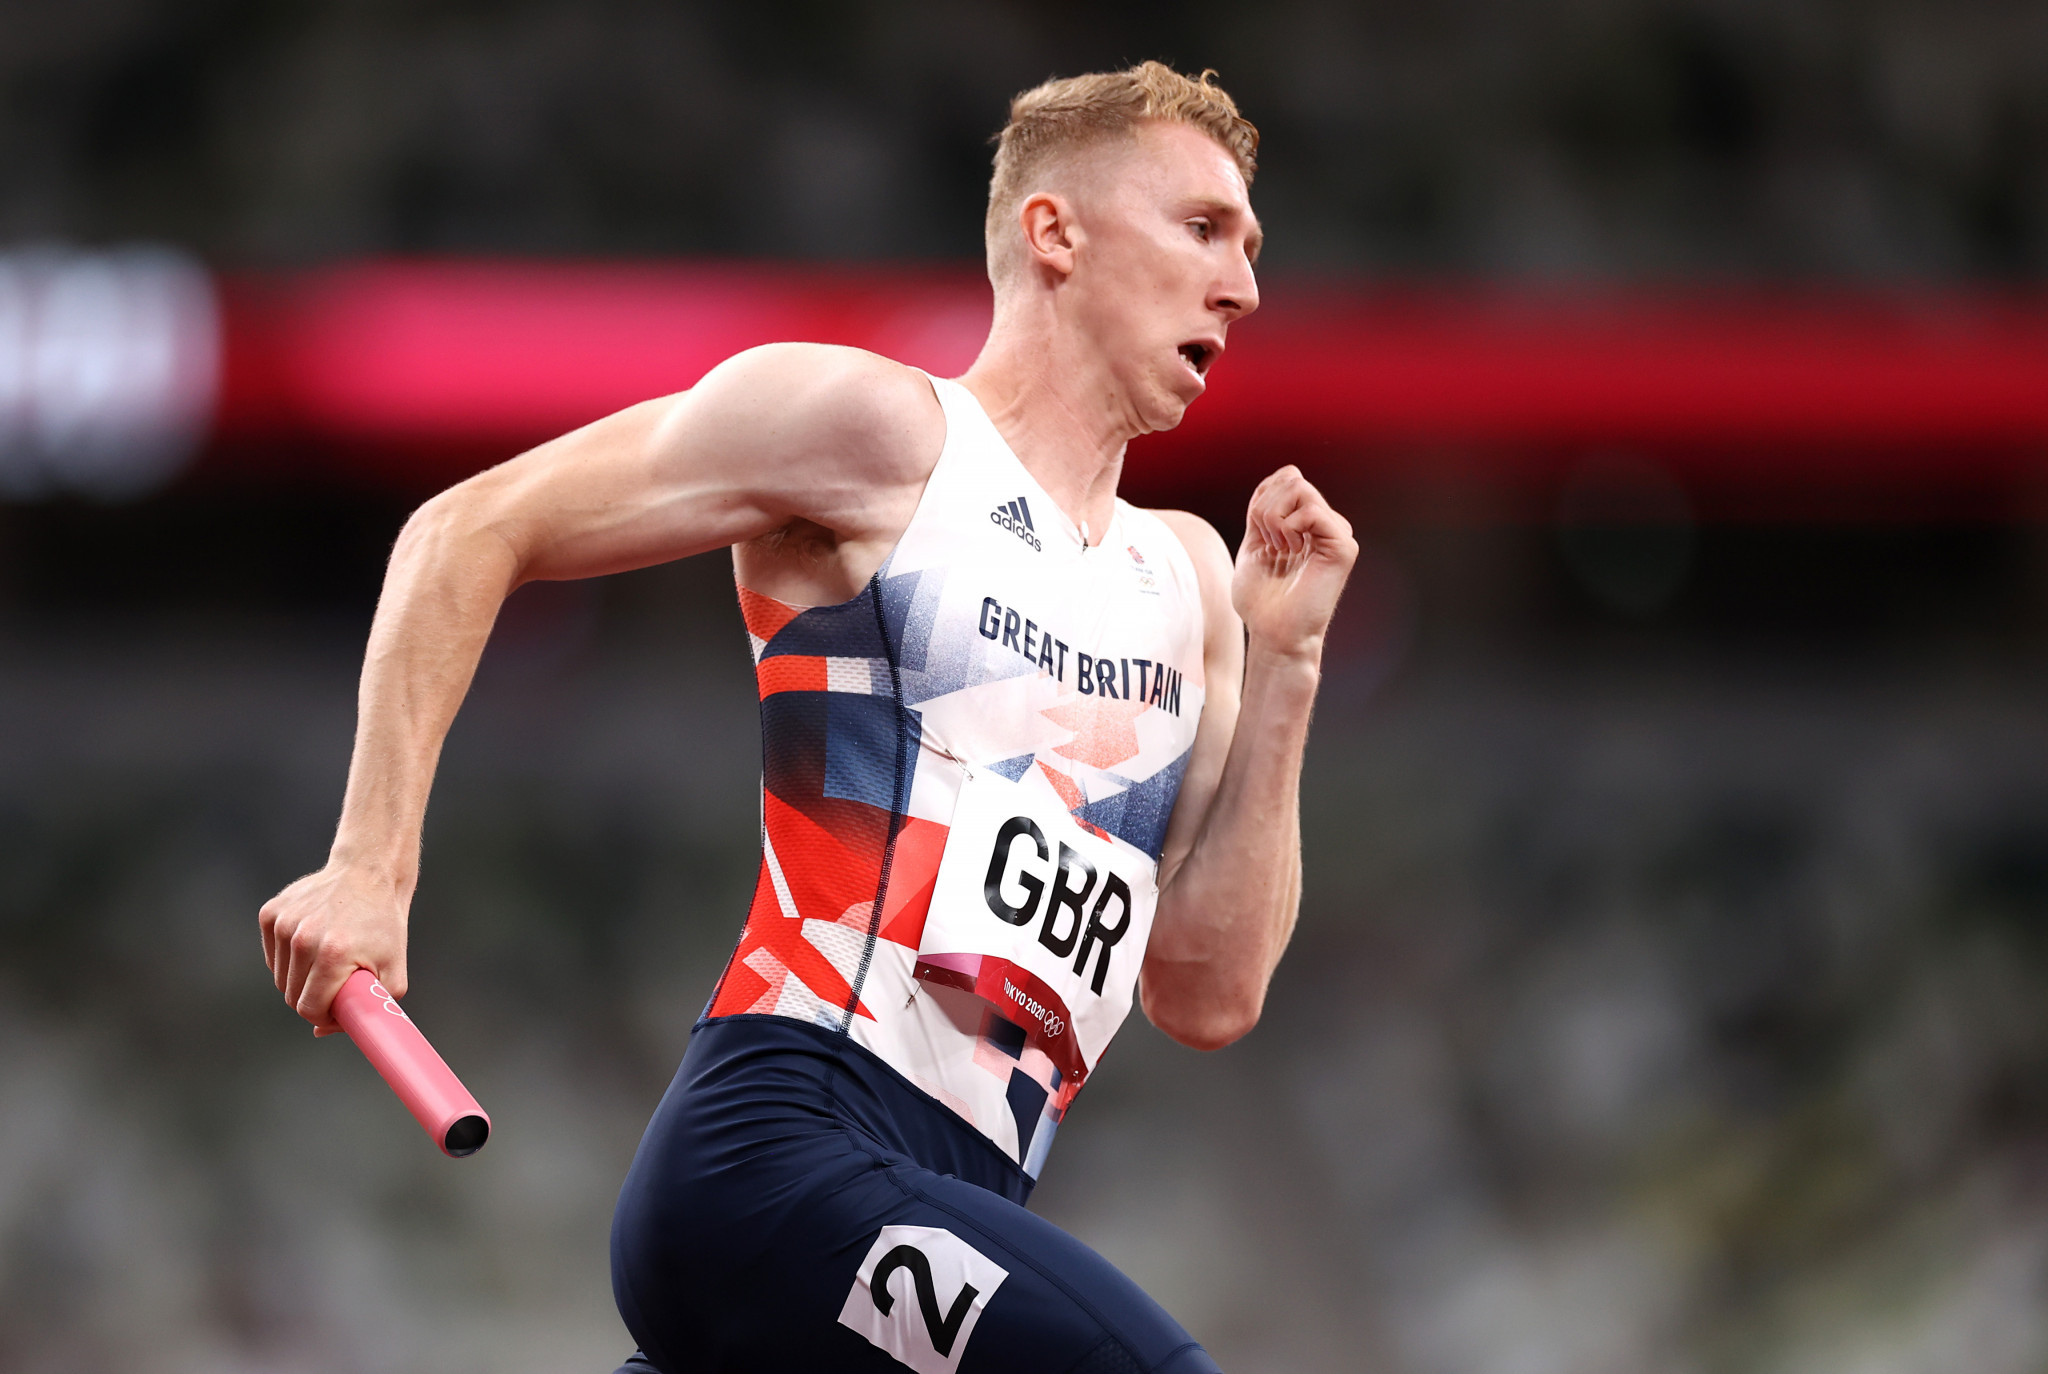 Tokyo 2020 Olympian Cameron Chalmers has been selected for Guernsey's Birmingham 2022 team ©Getty Images